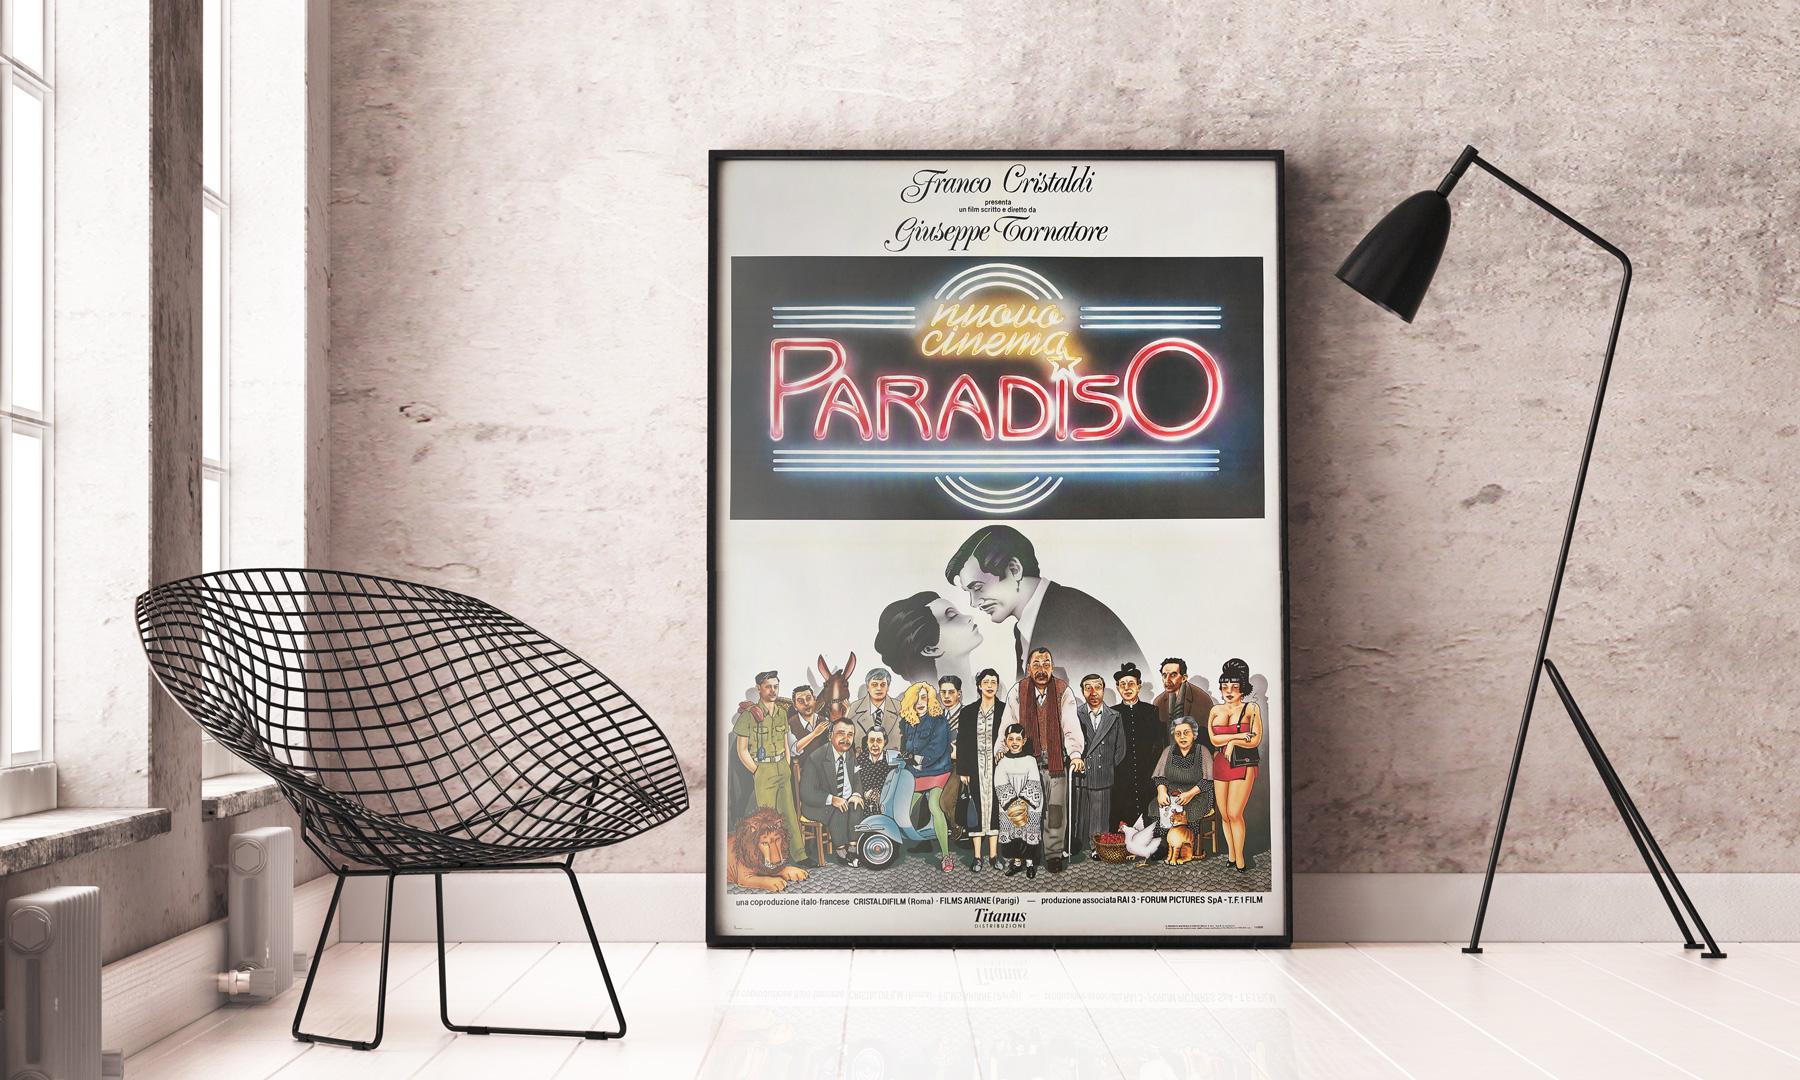 Wonderfully fun artwork on this country-of-origin poster for Tornatore's Cinema Paradiso. Cecchini design looks fantastic on the beautiful and large Italian 2 Foglio.

This original vintage movie poster was originally folded (as issued) and has